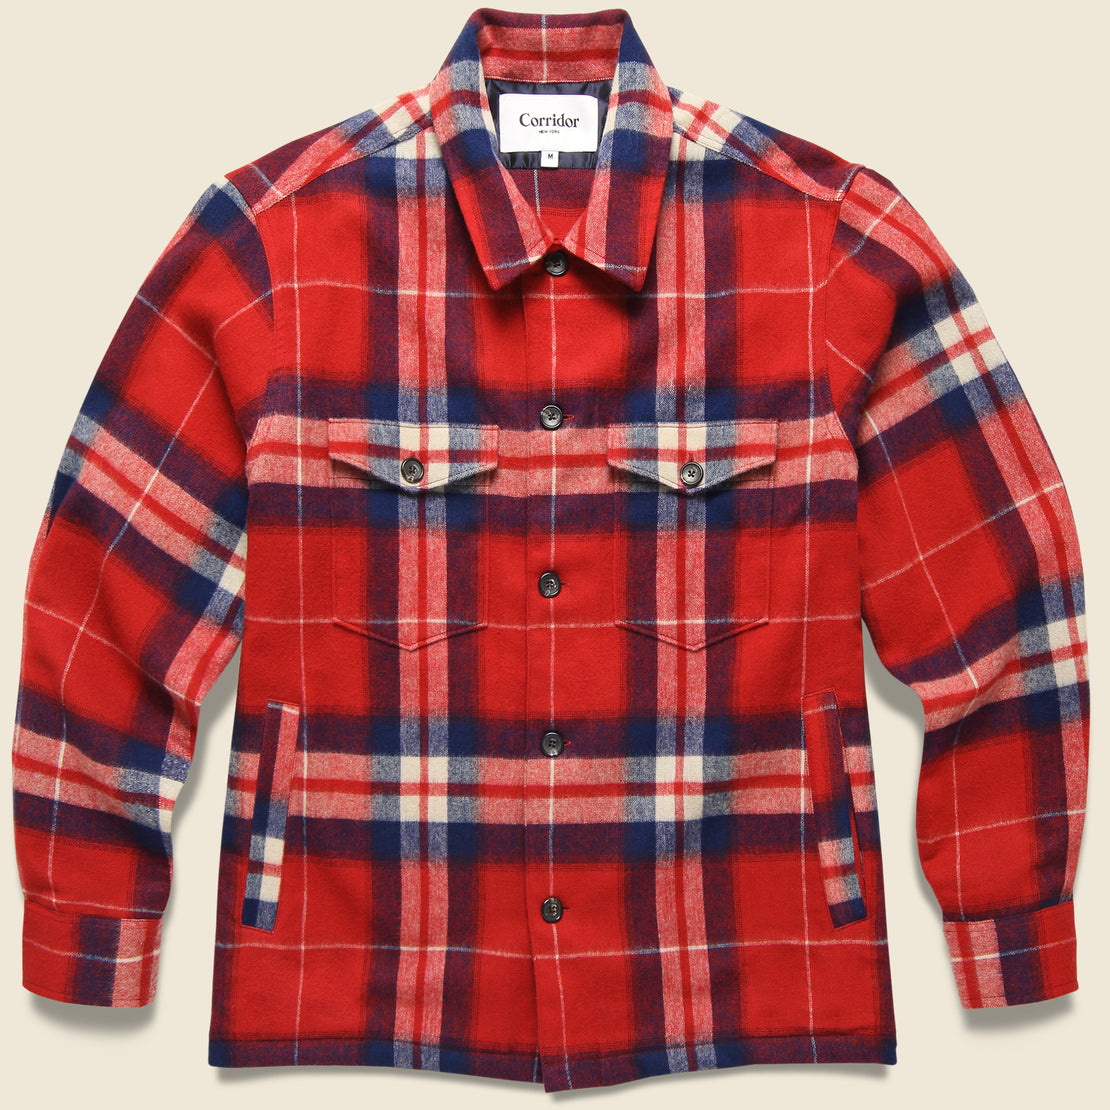 Ombre Plaid Military Shirt Jacket - Red